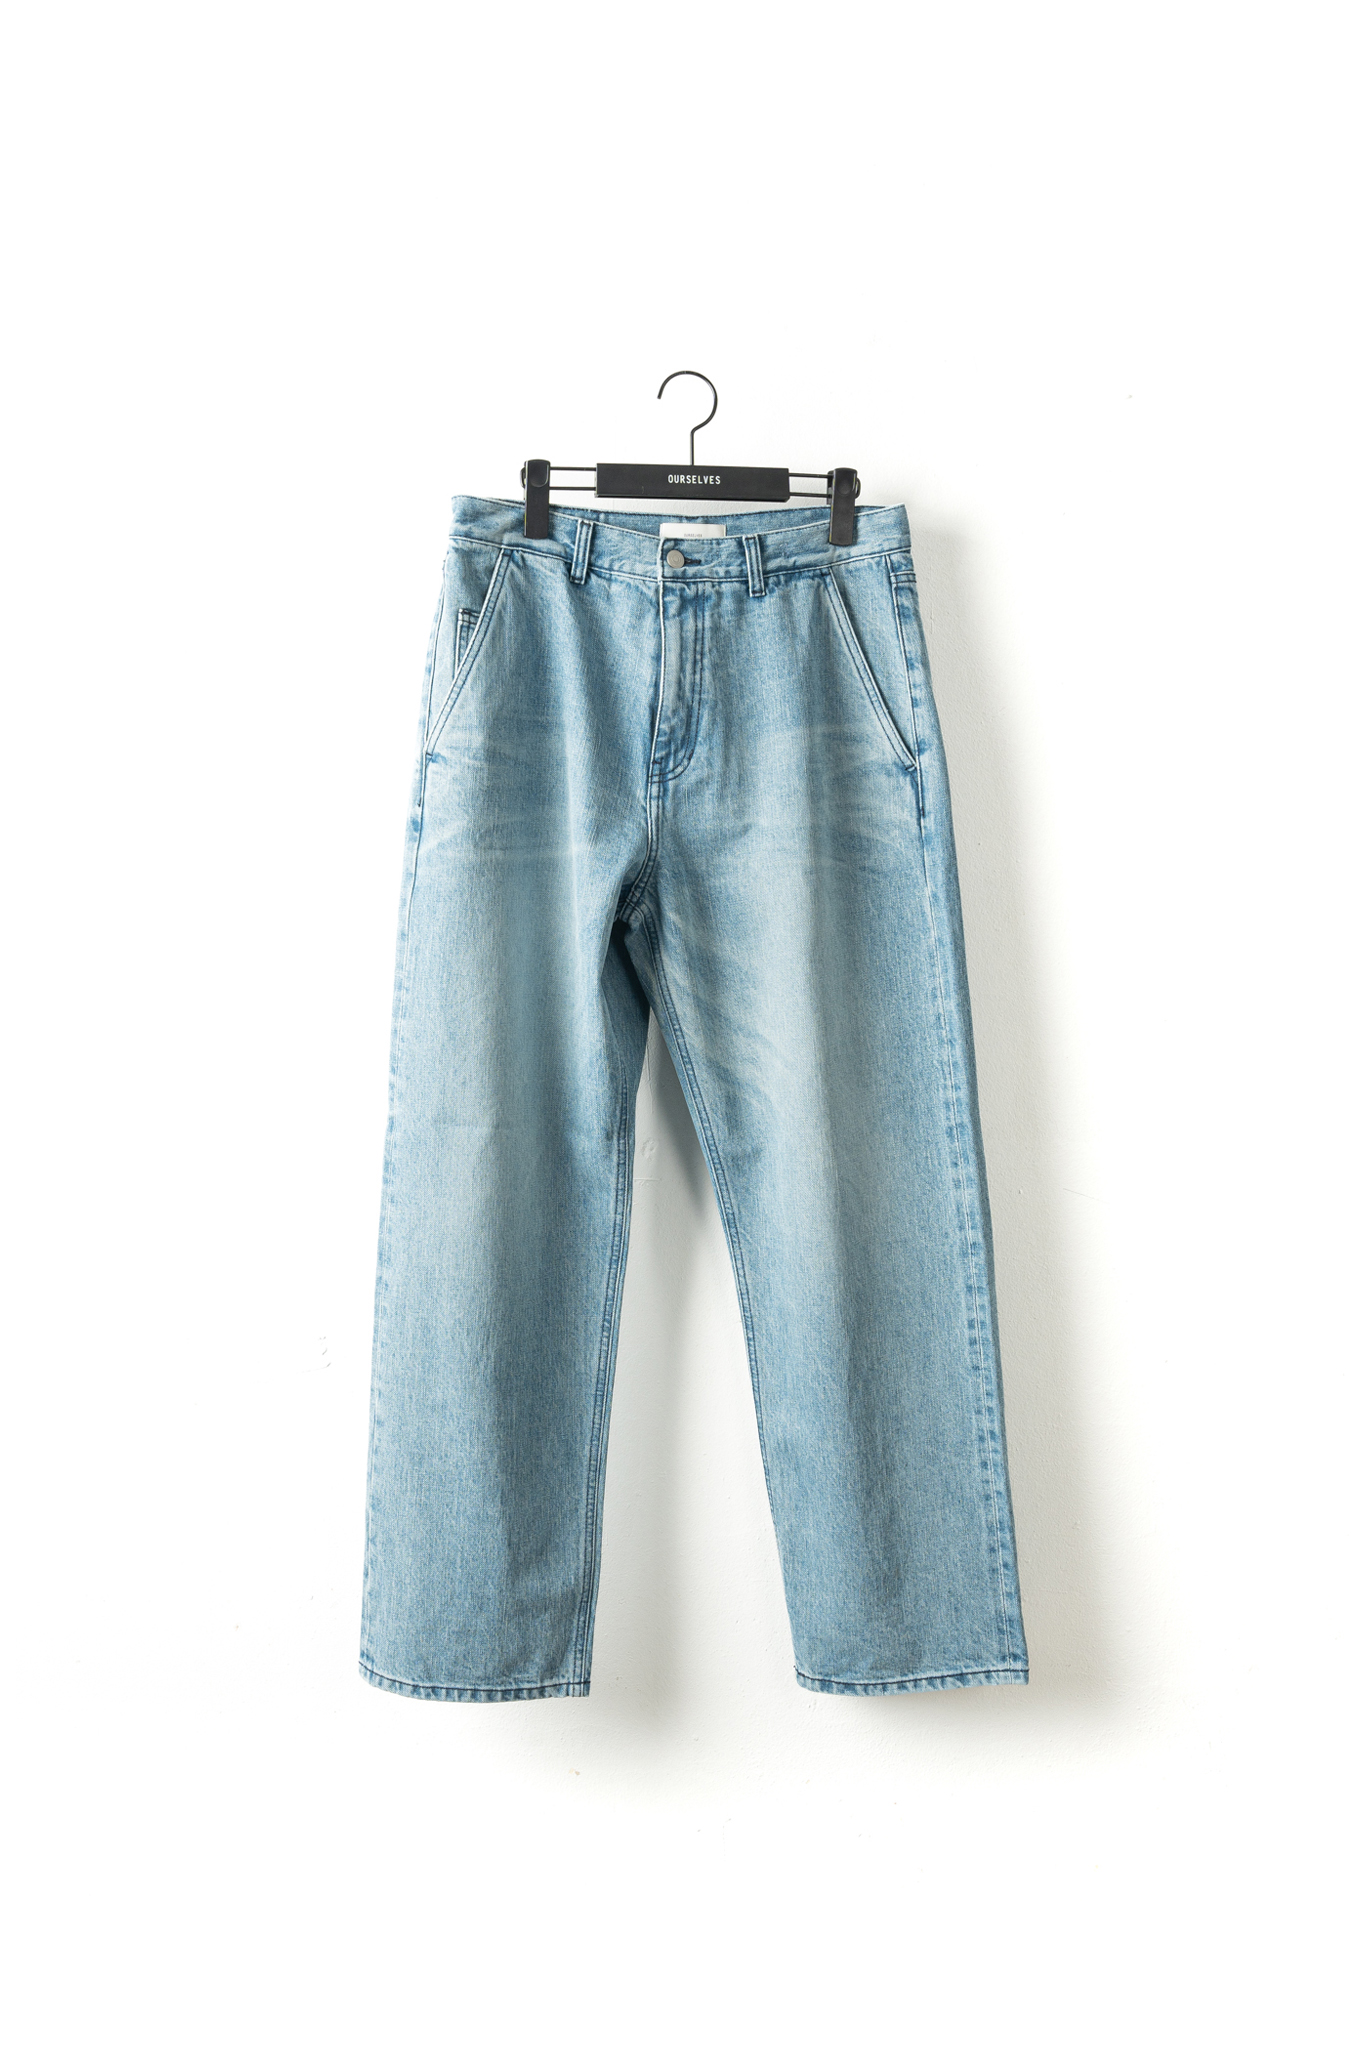 [Restock] 24SS Organic Cotton Relaxed Denim Pants - Bleached